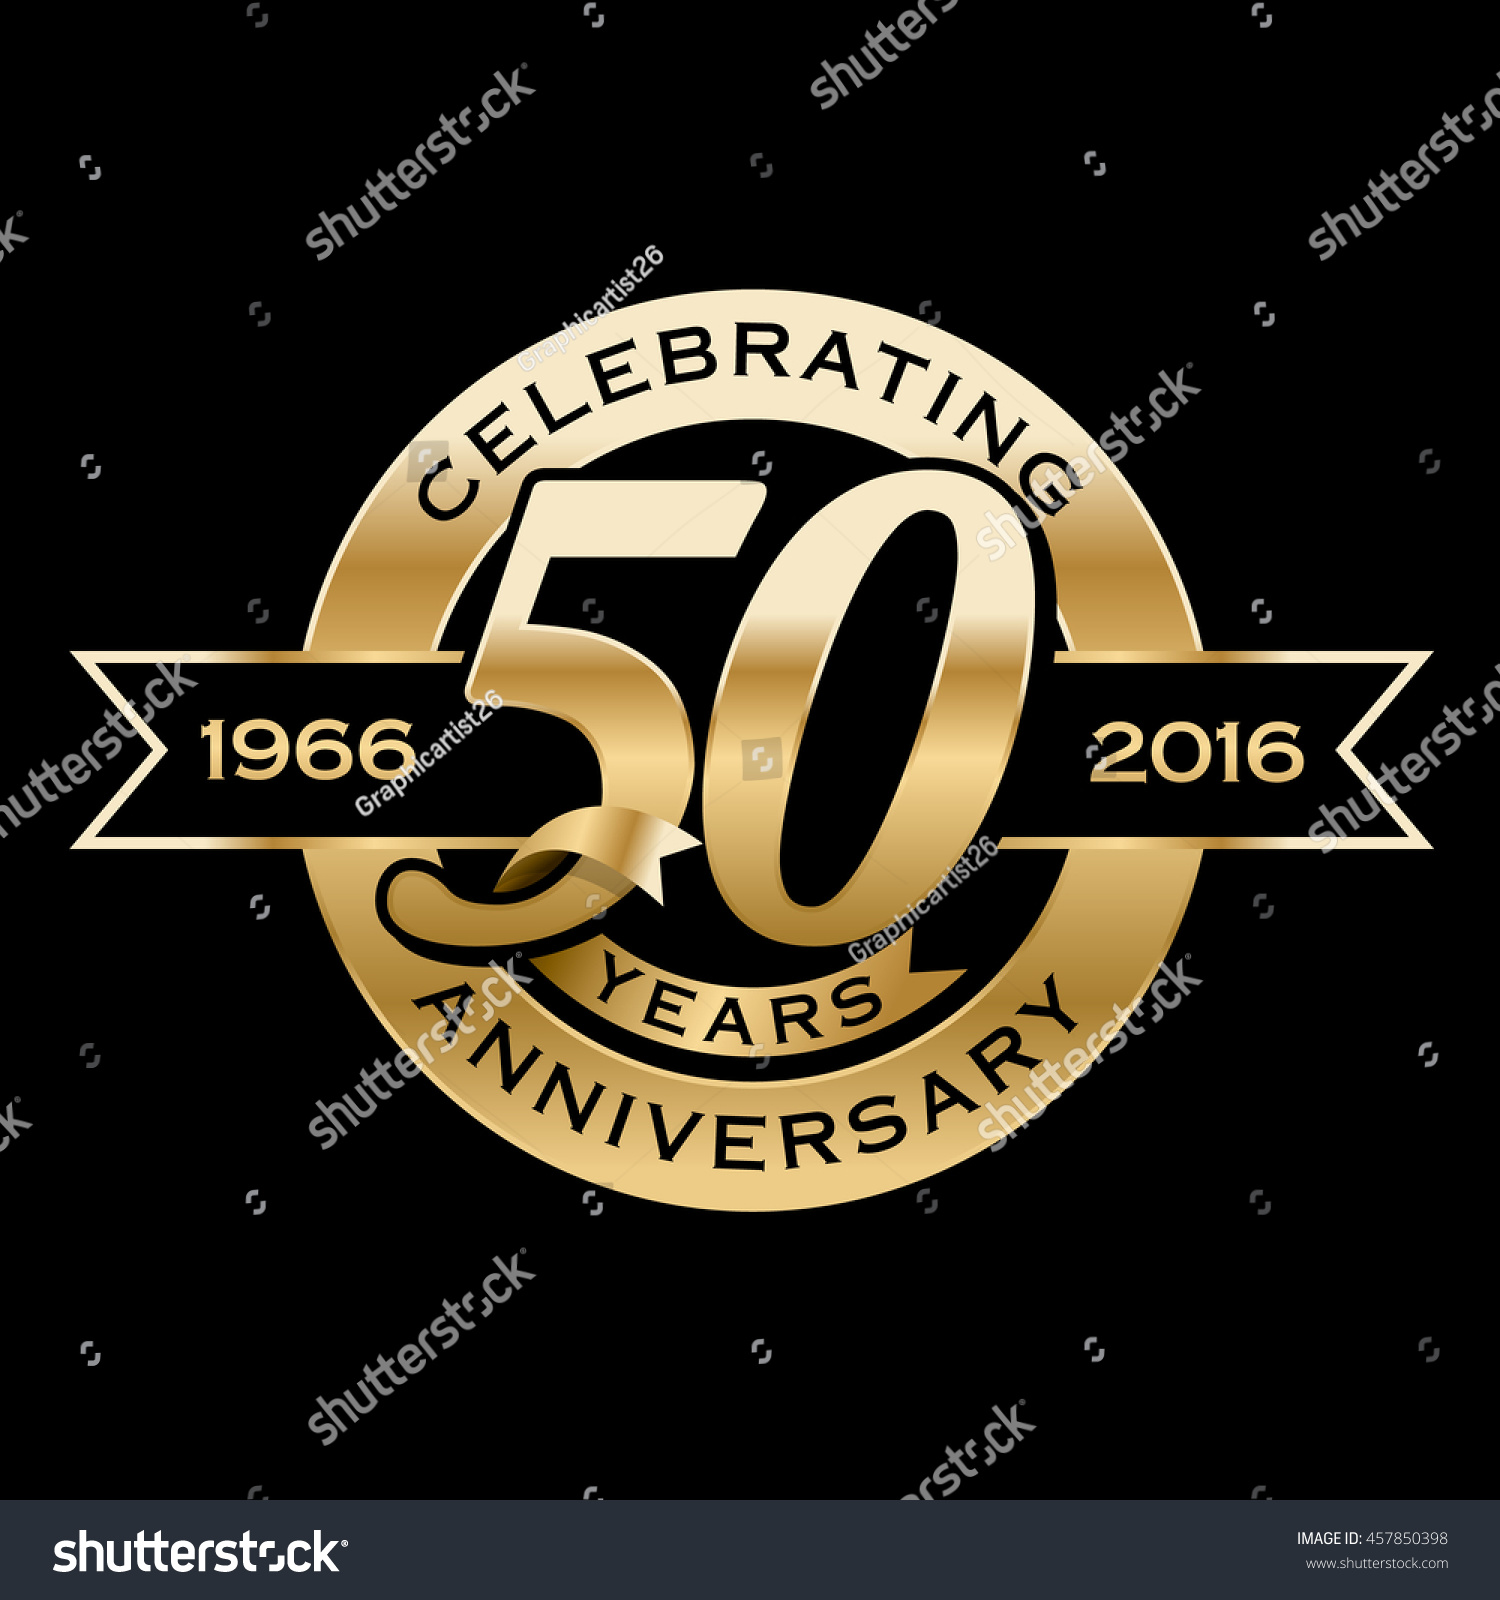 11,333 50th years Images, Stock Photos & Vectors | Shutterstock